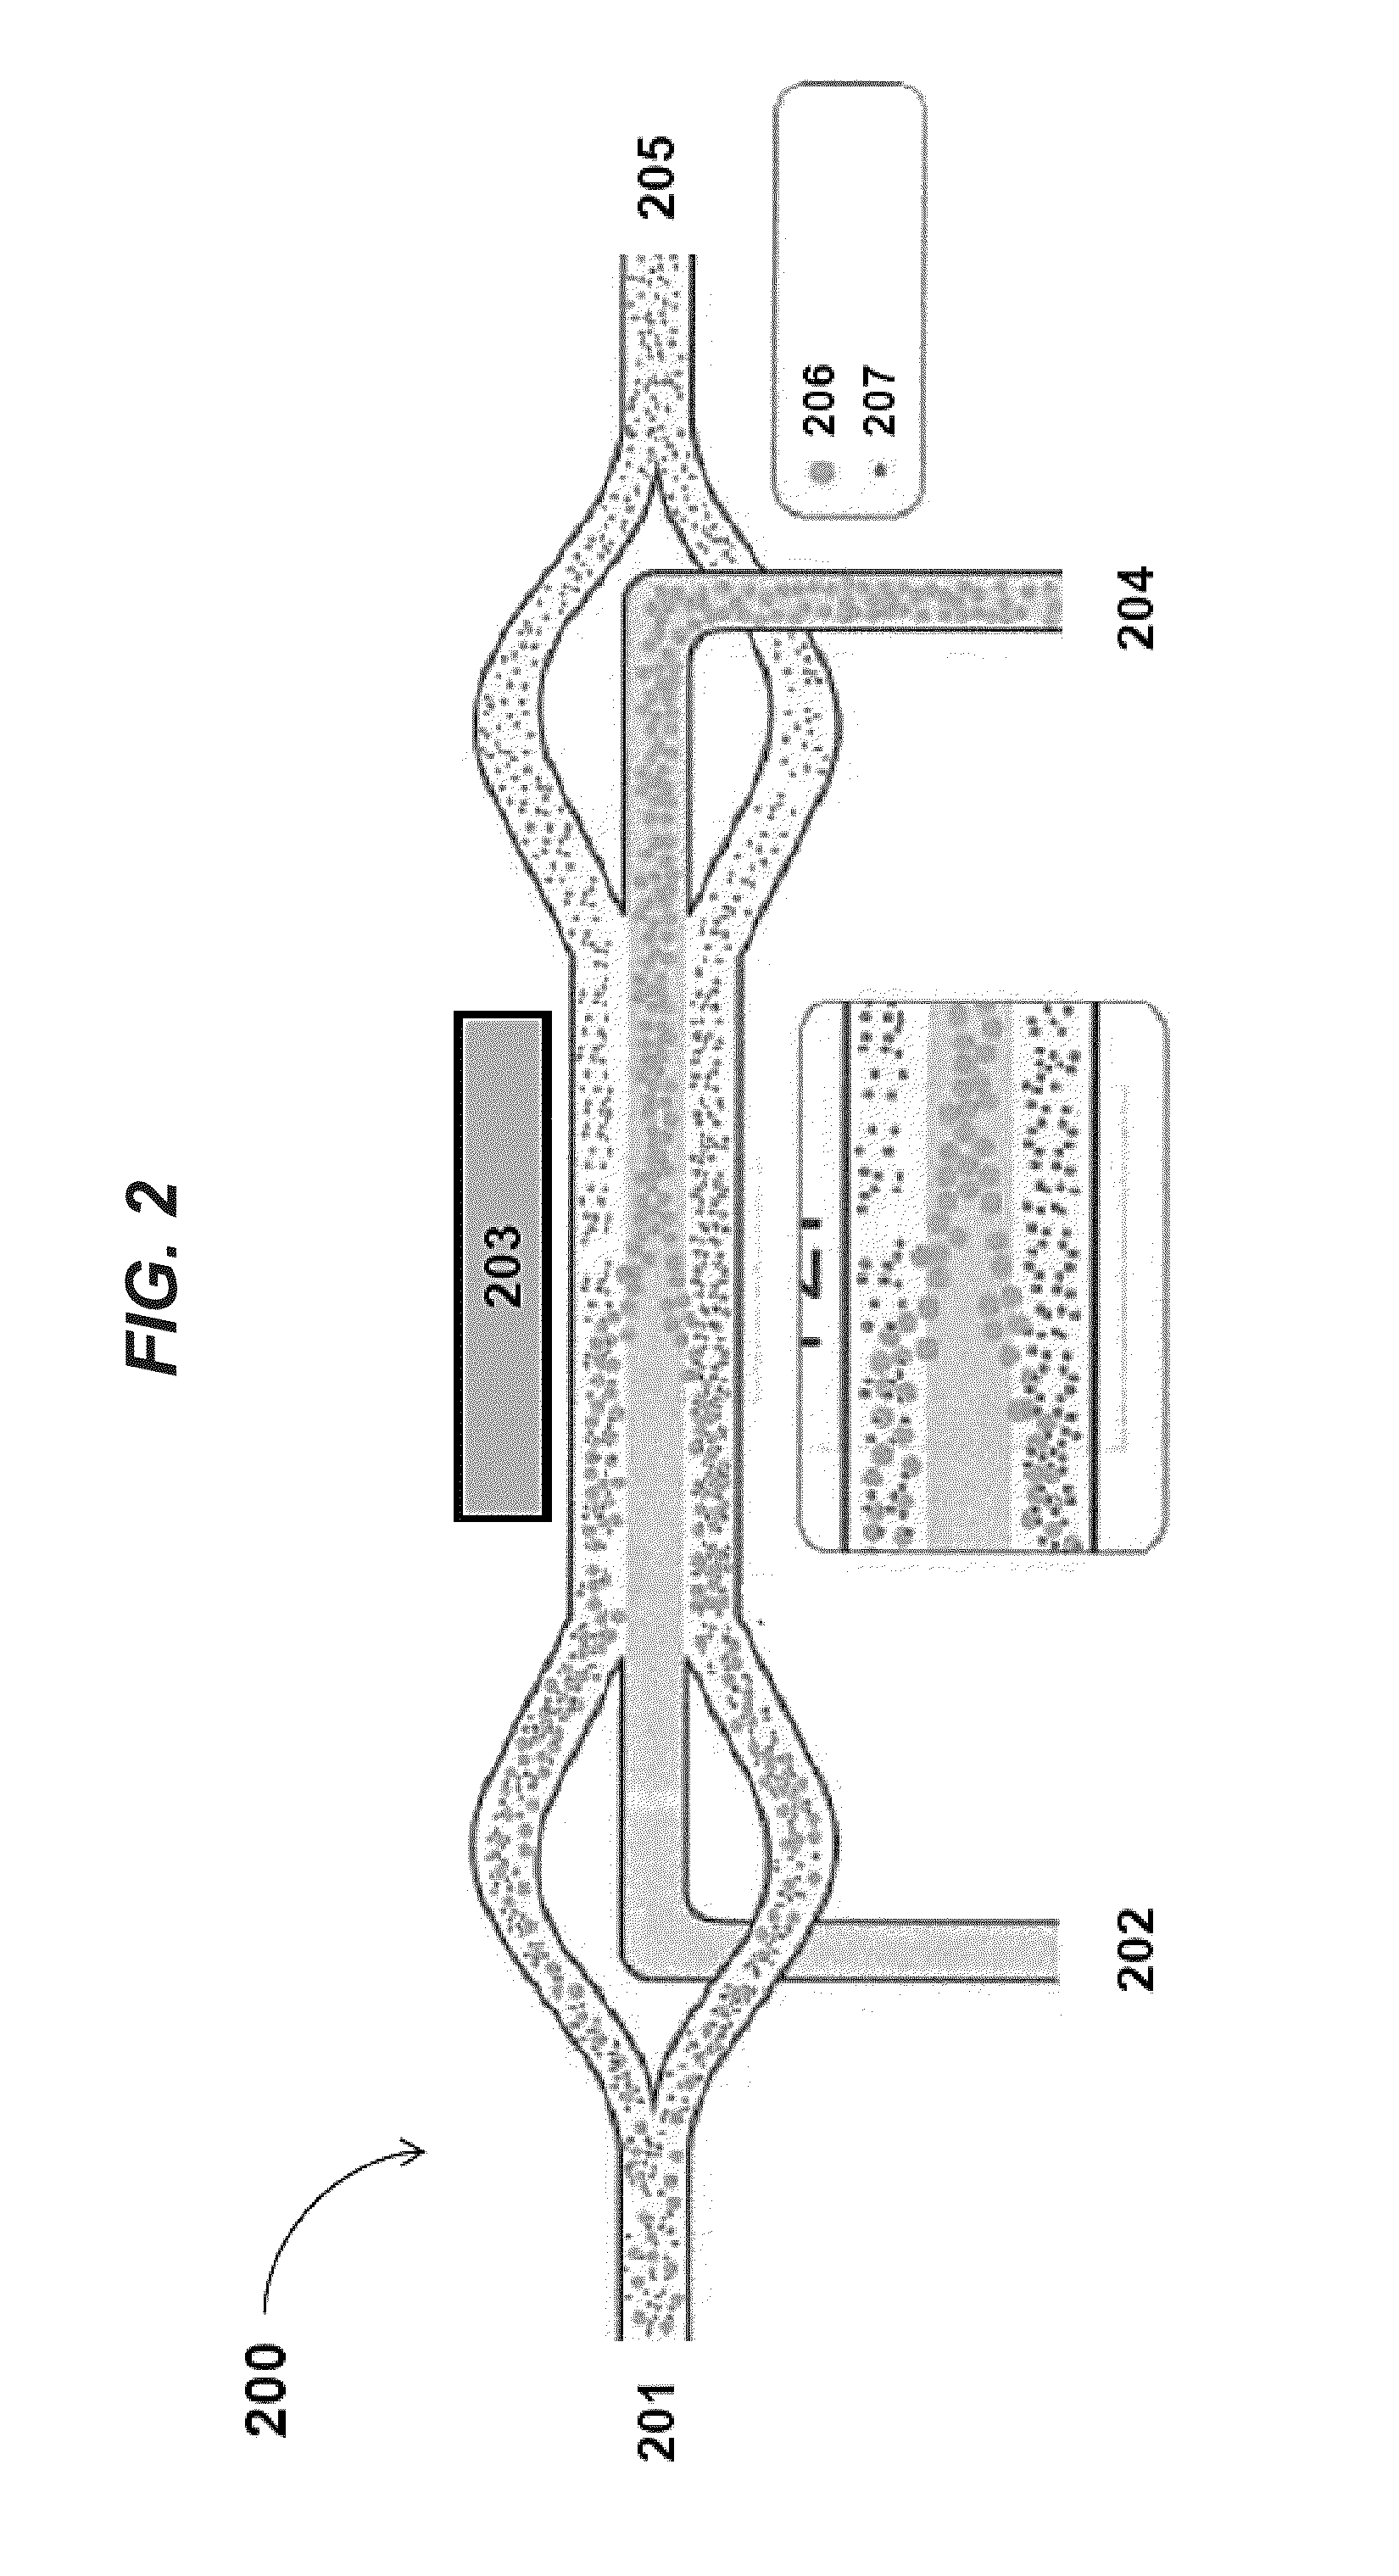 Devices and methods for processing a biological sample